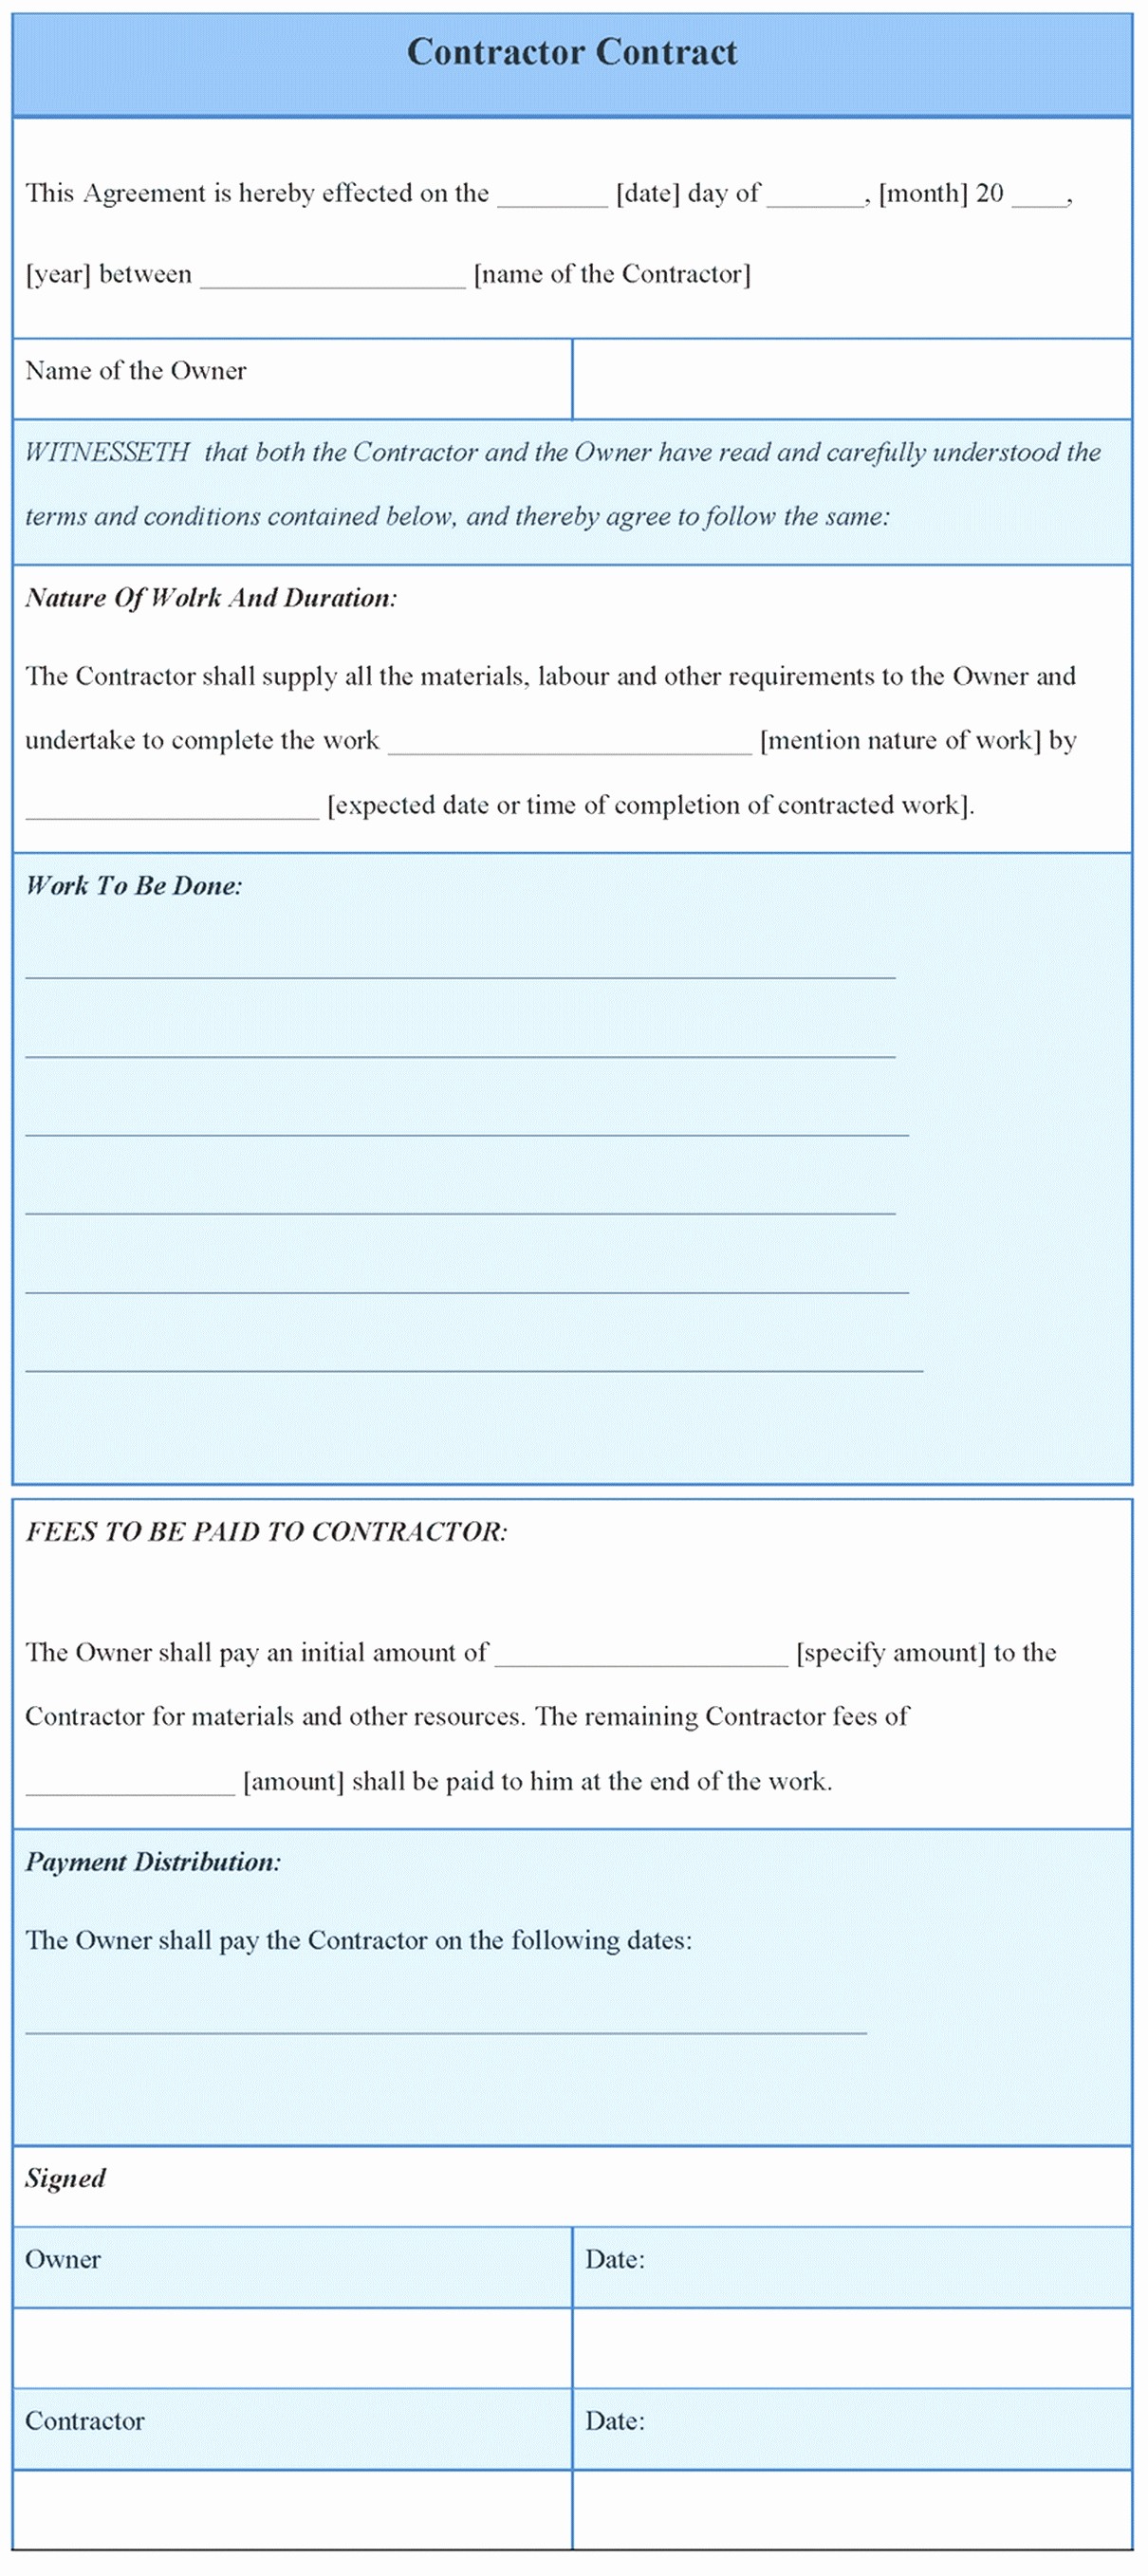 Microsoft Access Contract Management Template Inspirational Document